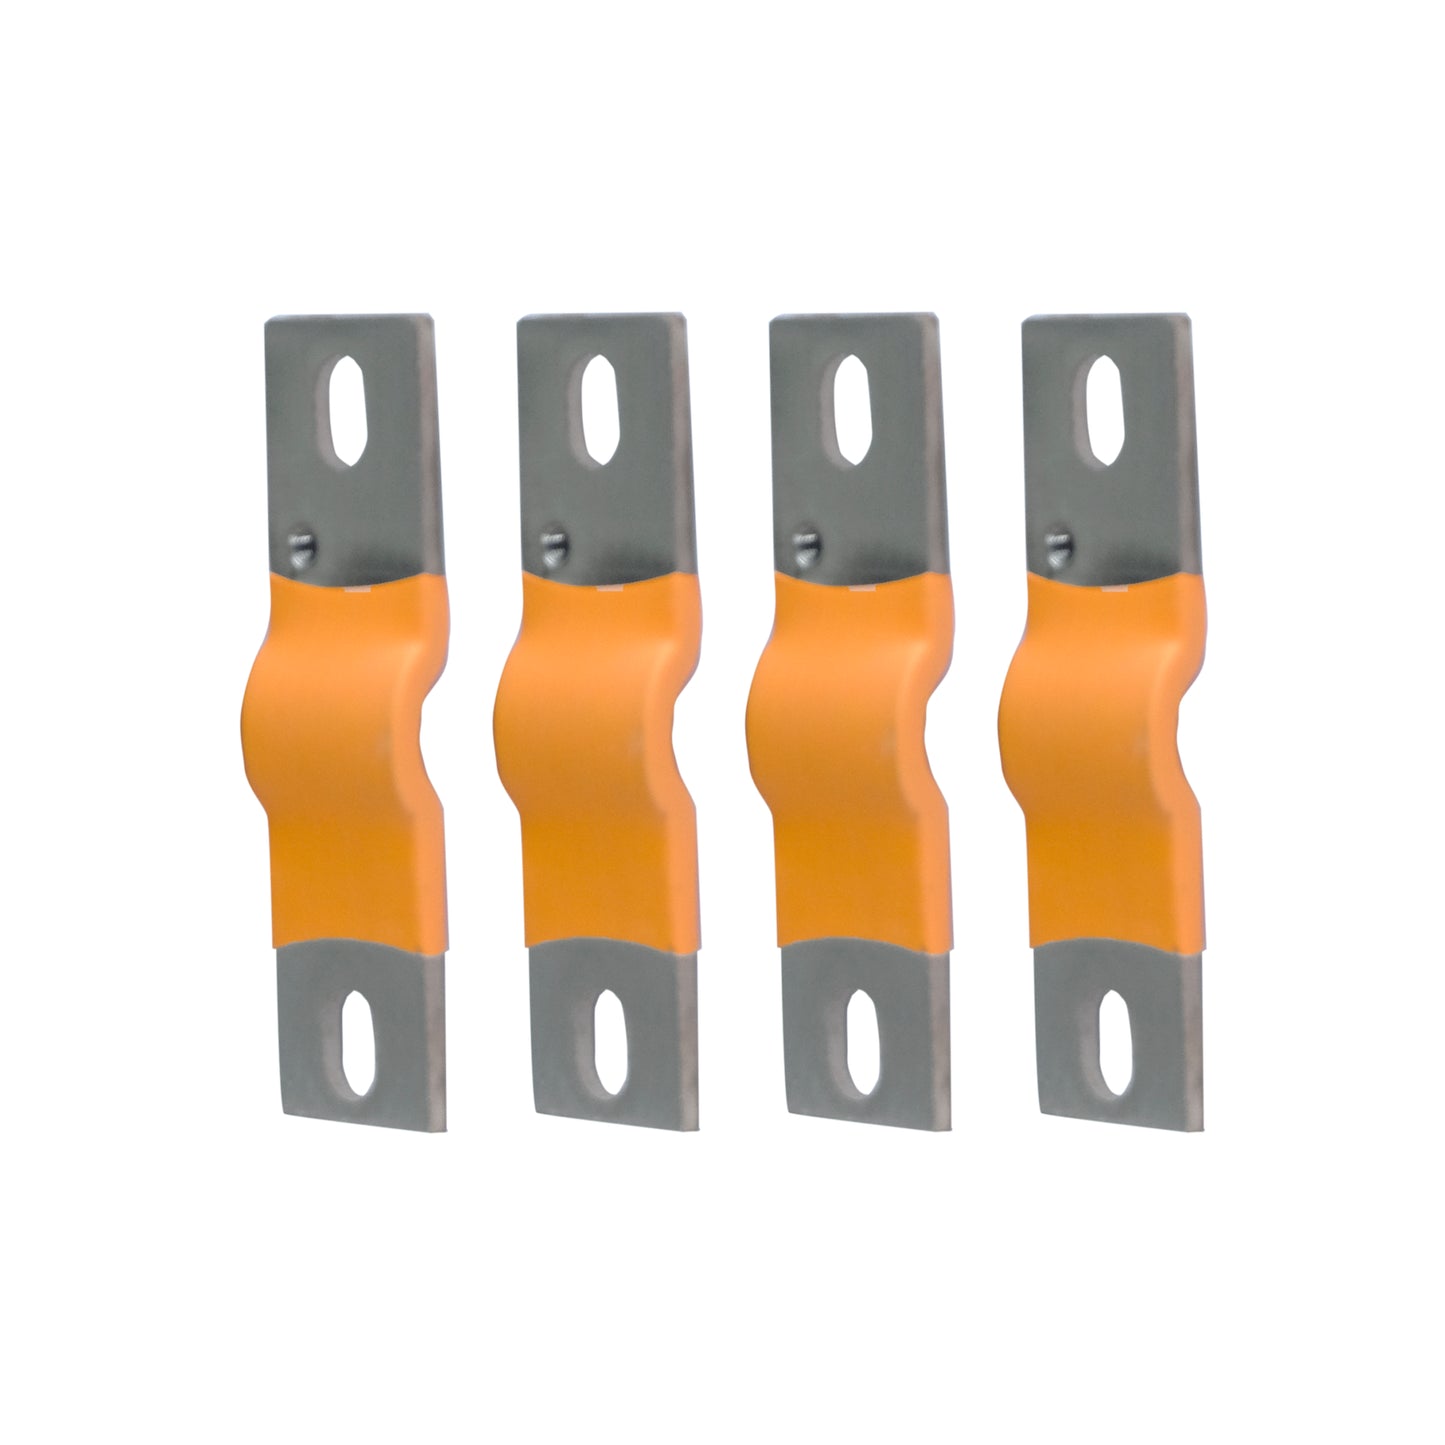 4PCS Flexible Nickel-Plated Copper Bus Bar Terminal Connectors with one M3 hole